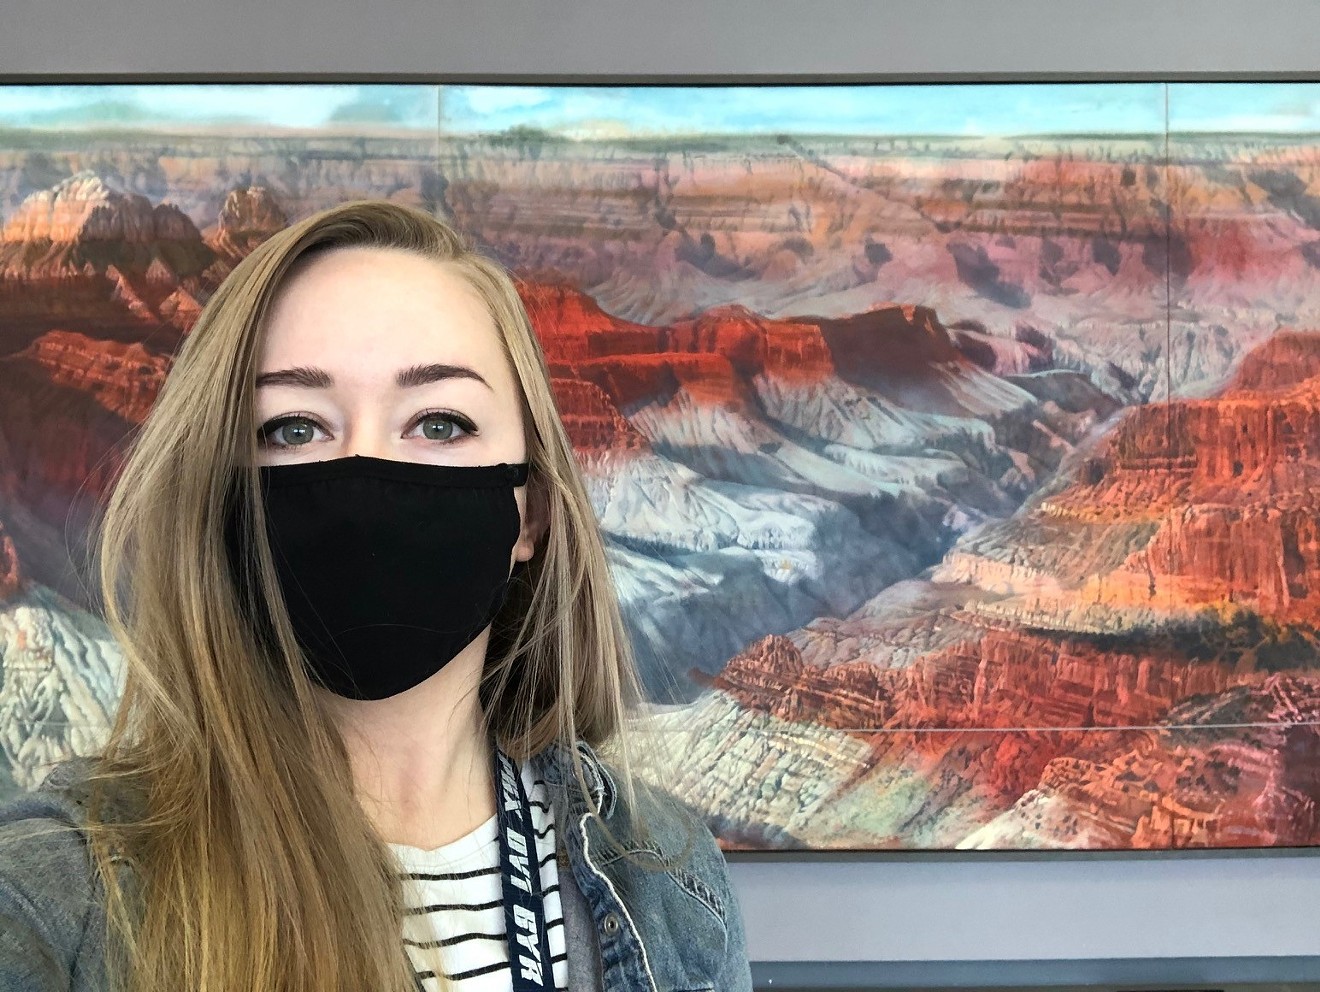 Haley Hinds took this photo with a Grand Canyon landscape inside Sky Harbor Airport.